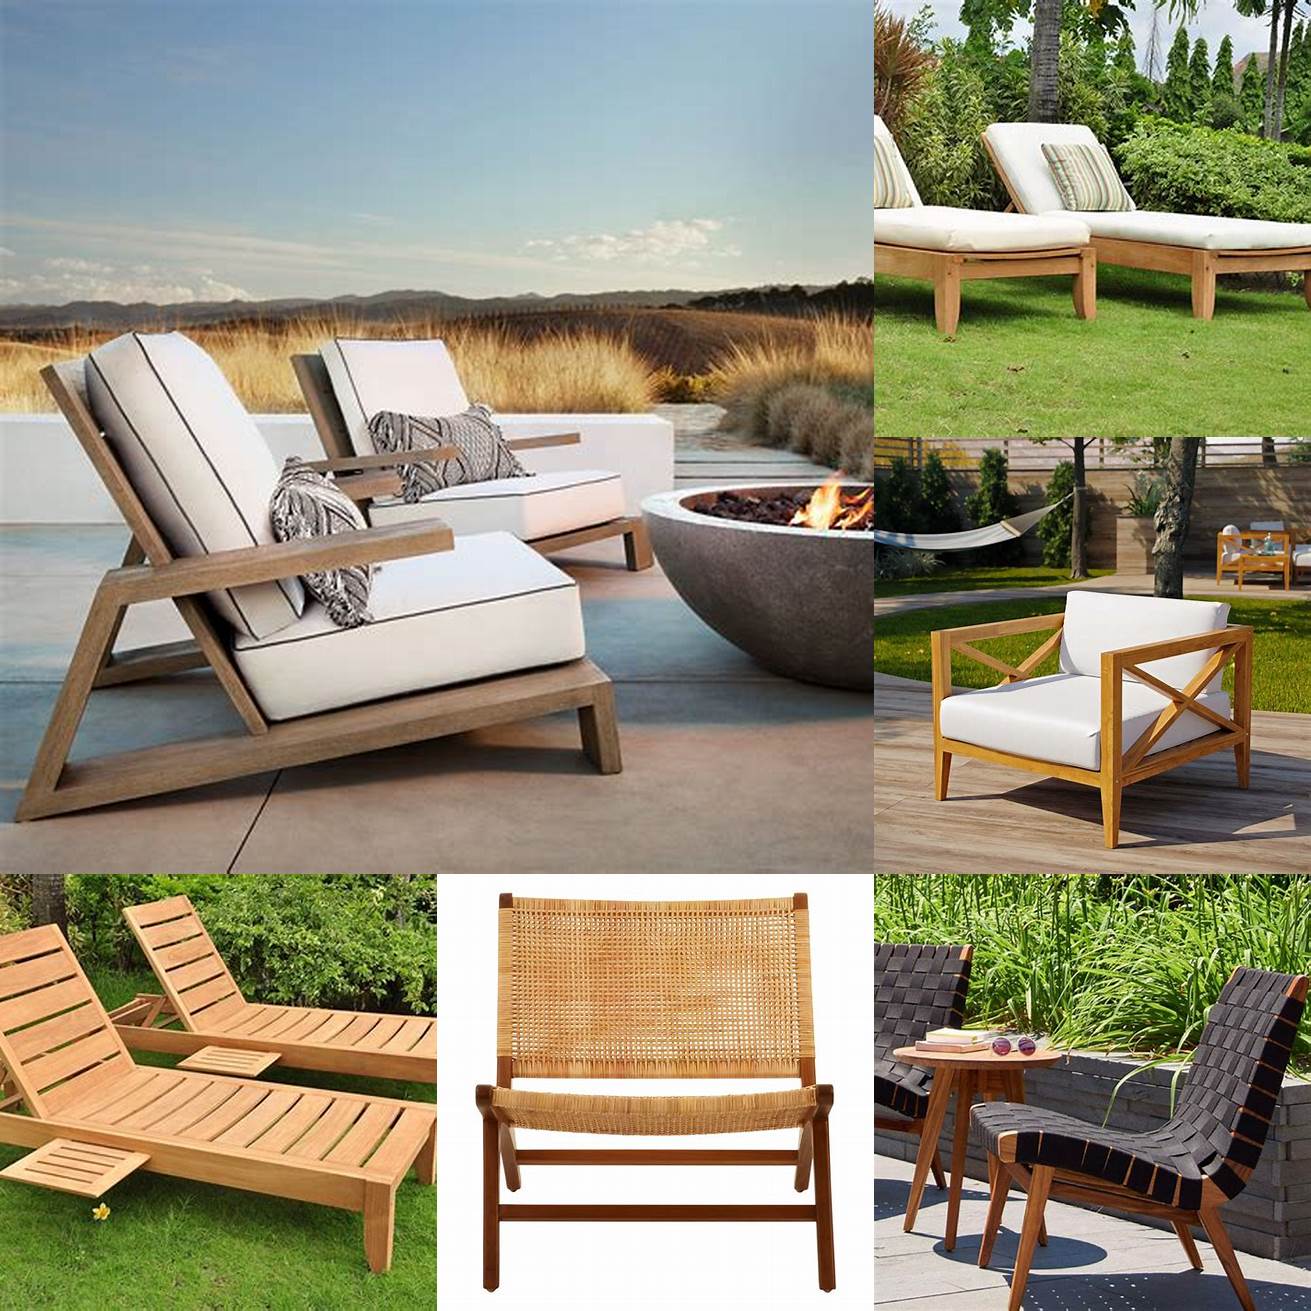 The Teak Outdoor Lounge Chair